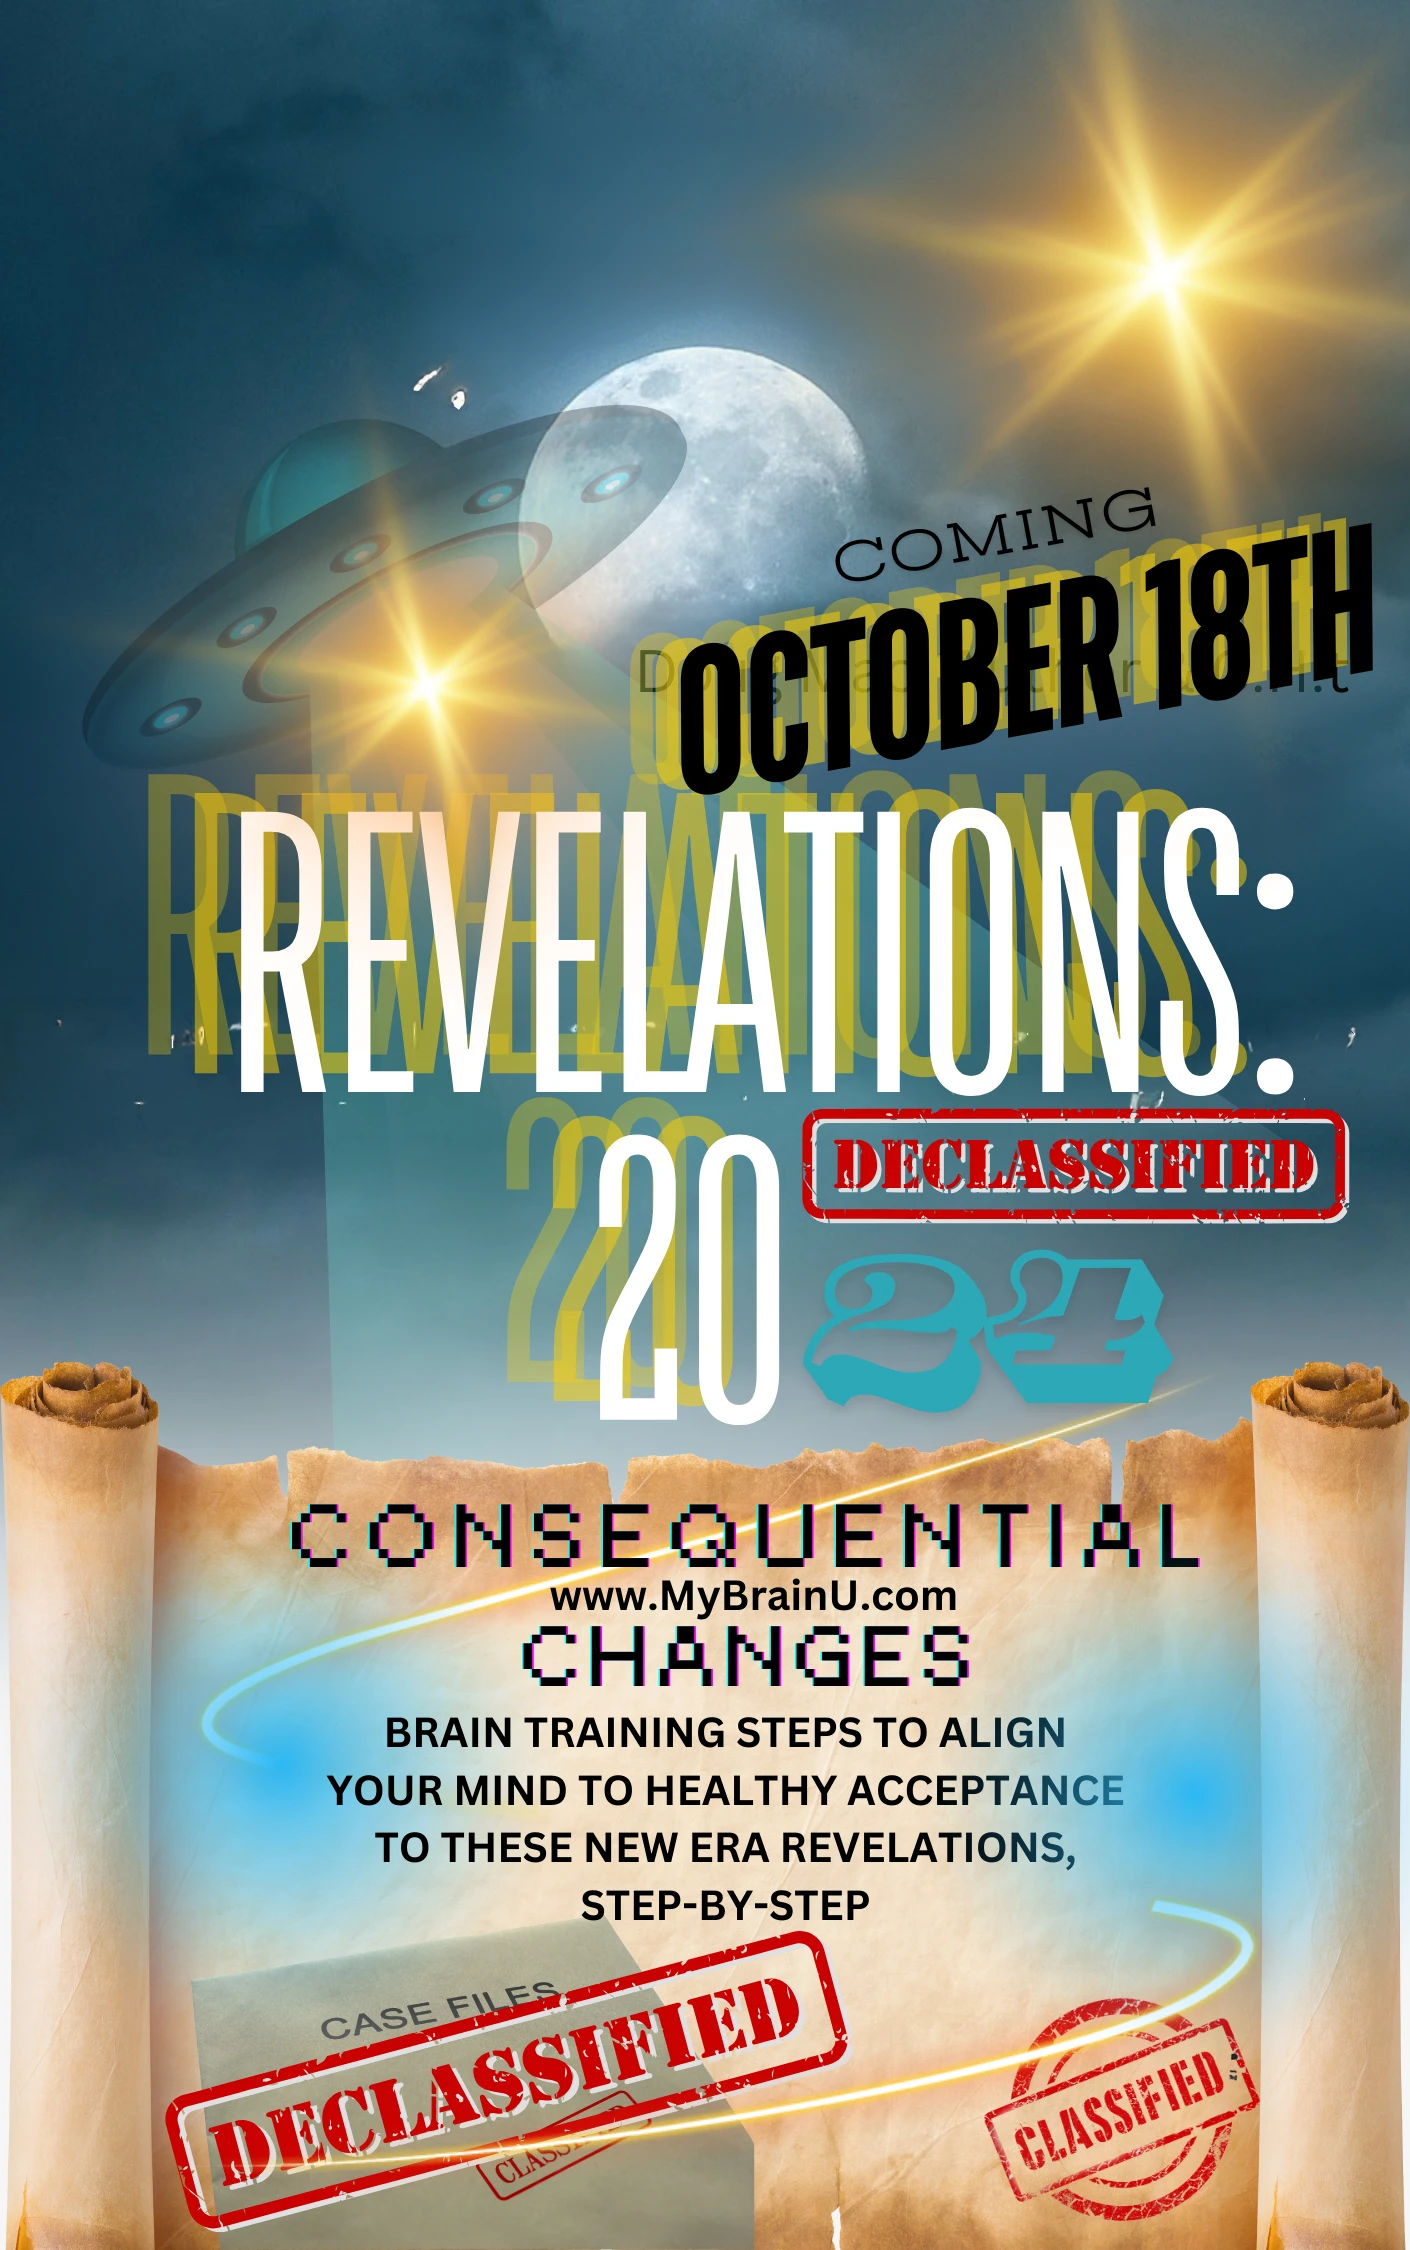 3286-oct18th-revelations20-october-17173599106421.png